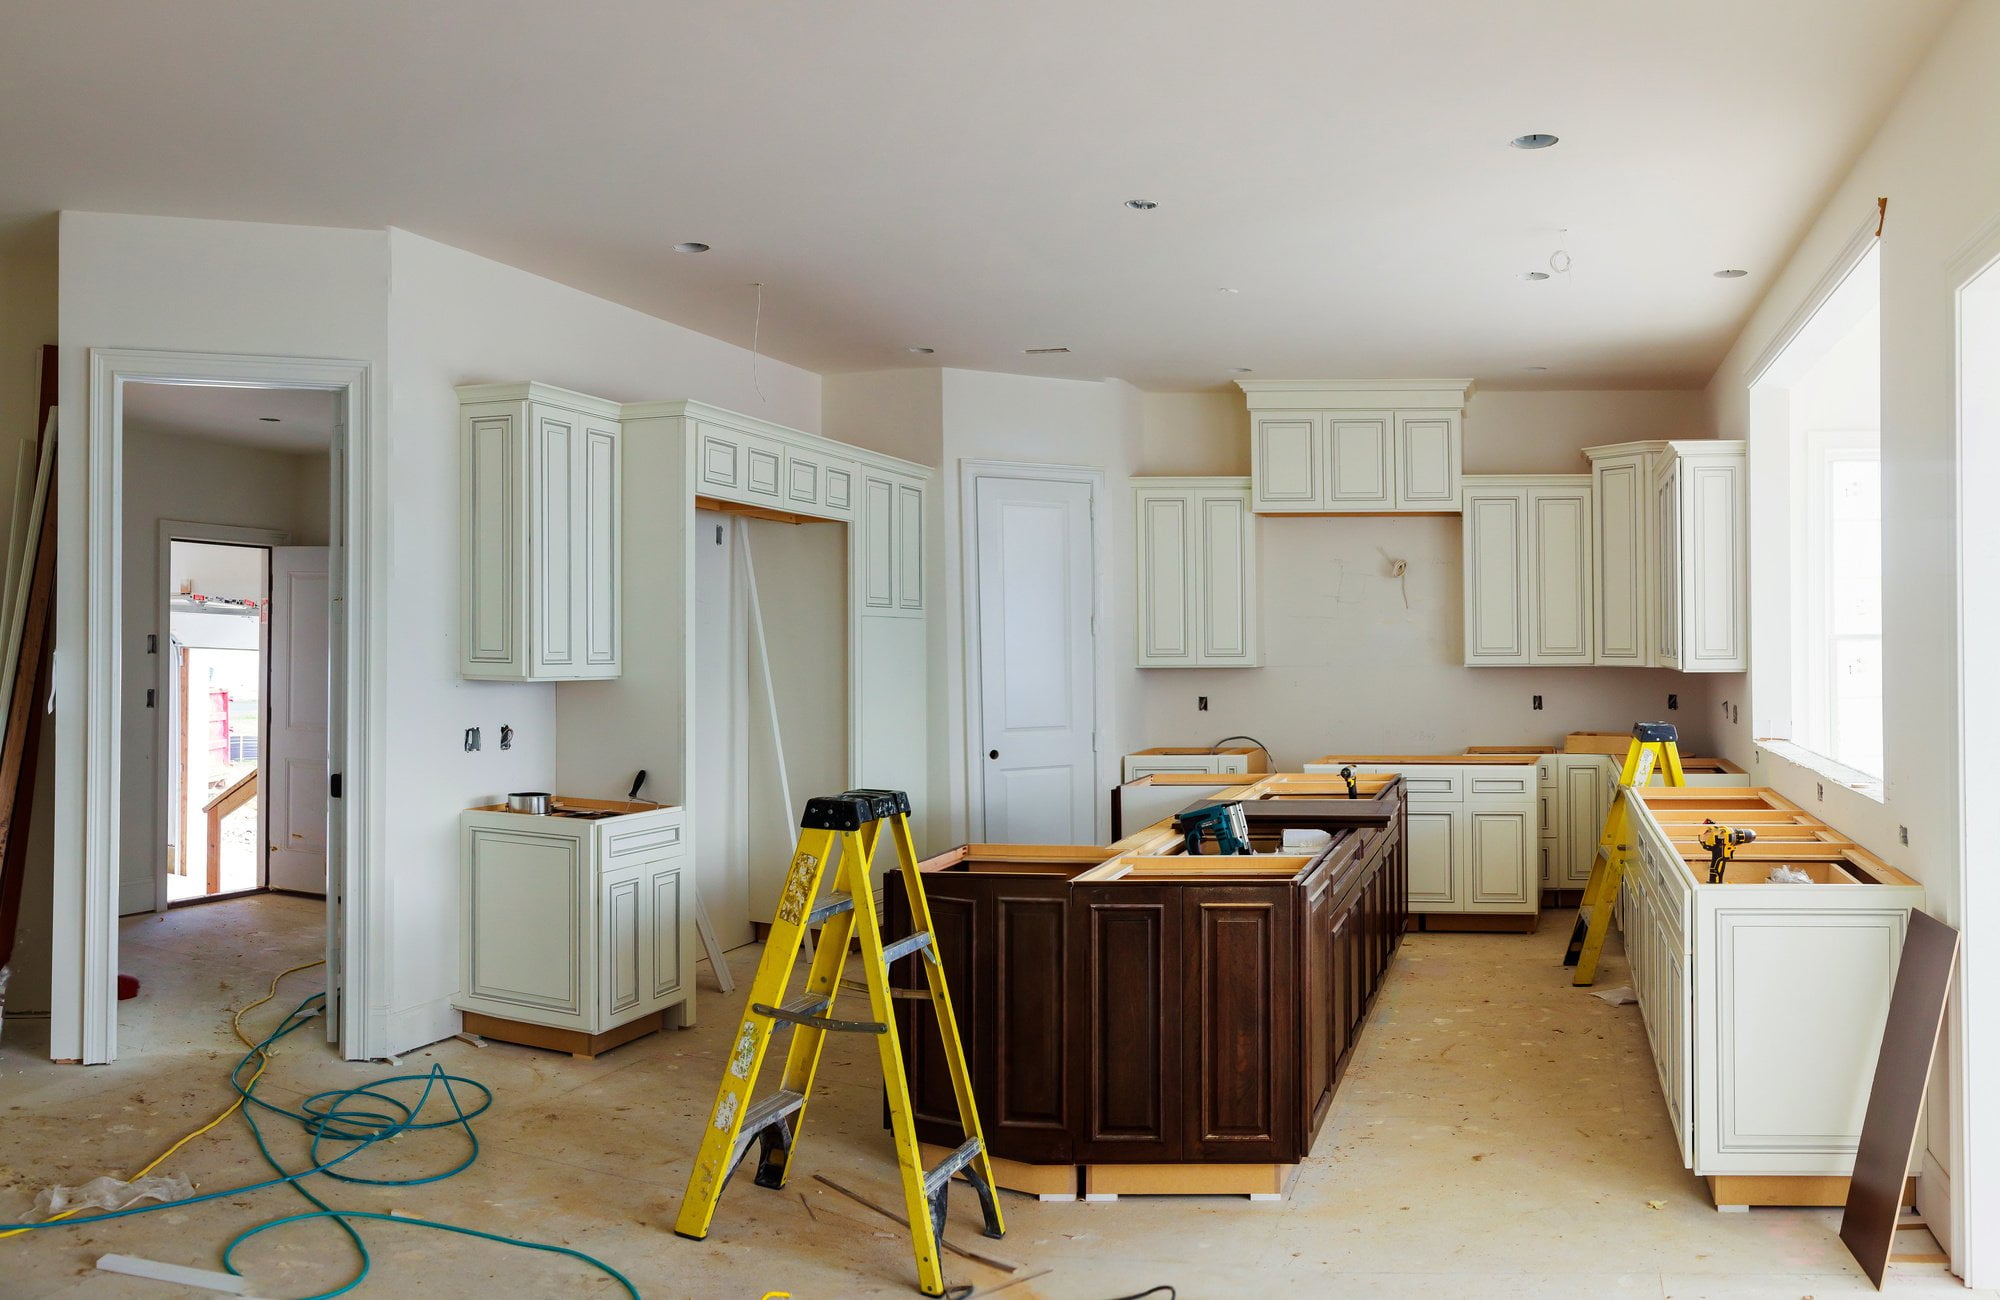 Home renovations help make your home a better place for your family. Check out this home renovation planner to help you decide which one is right for you.